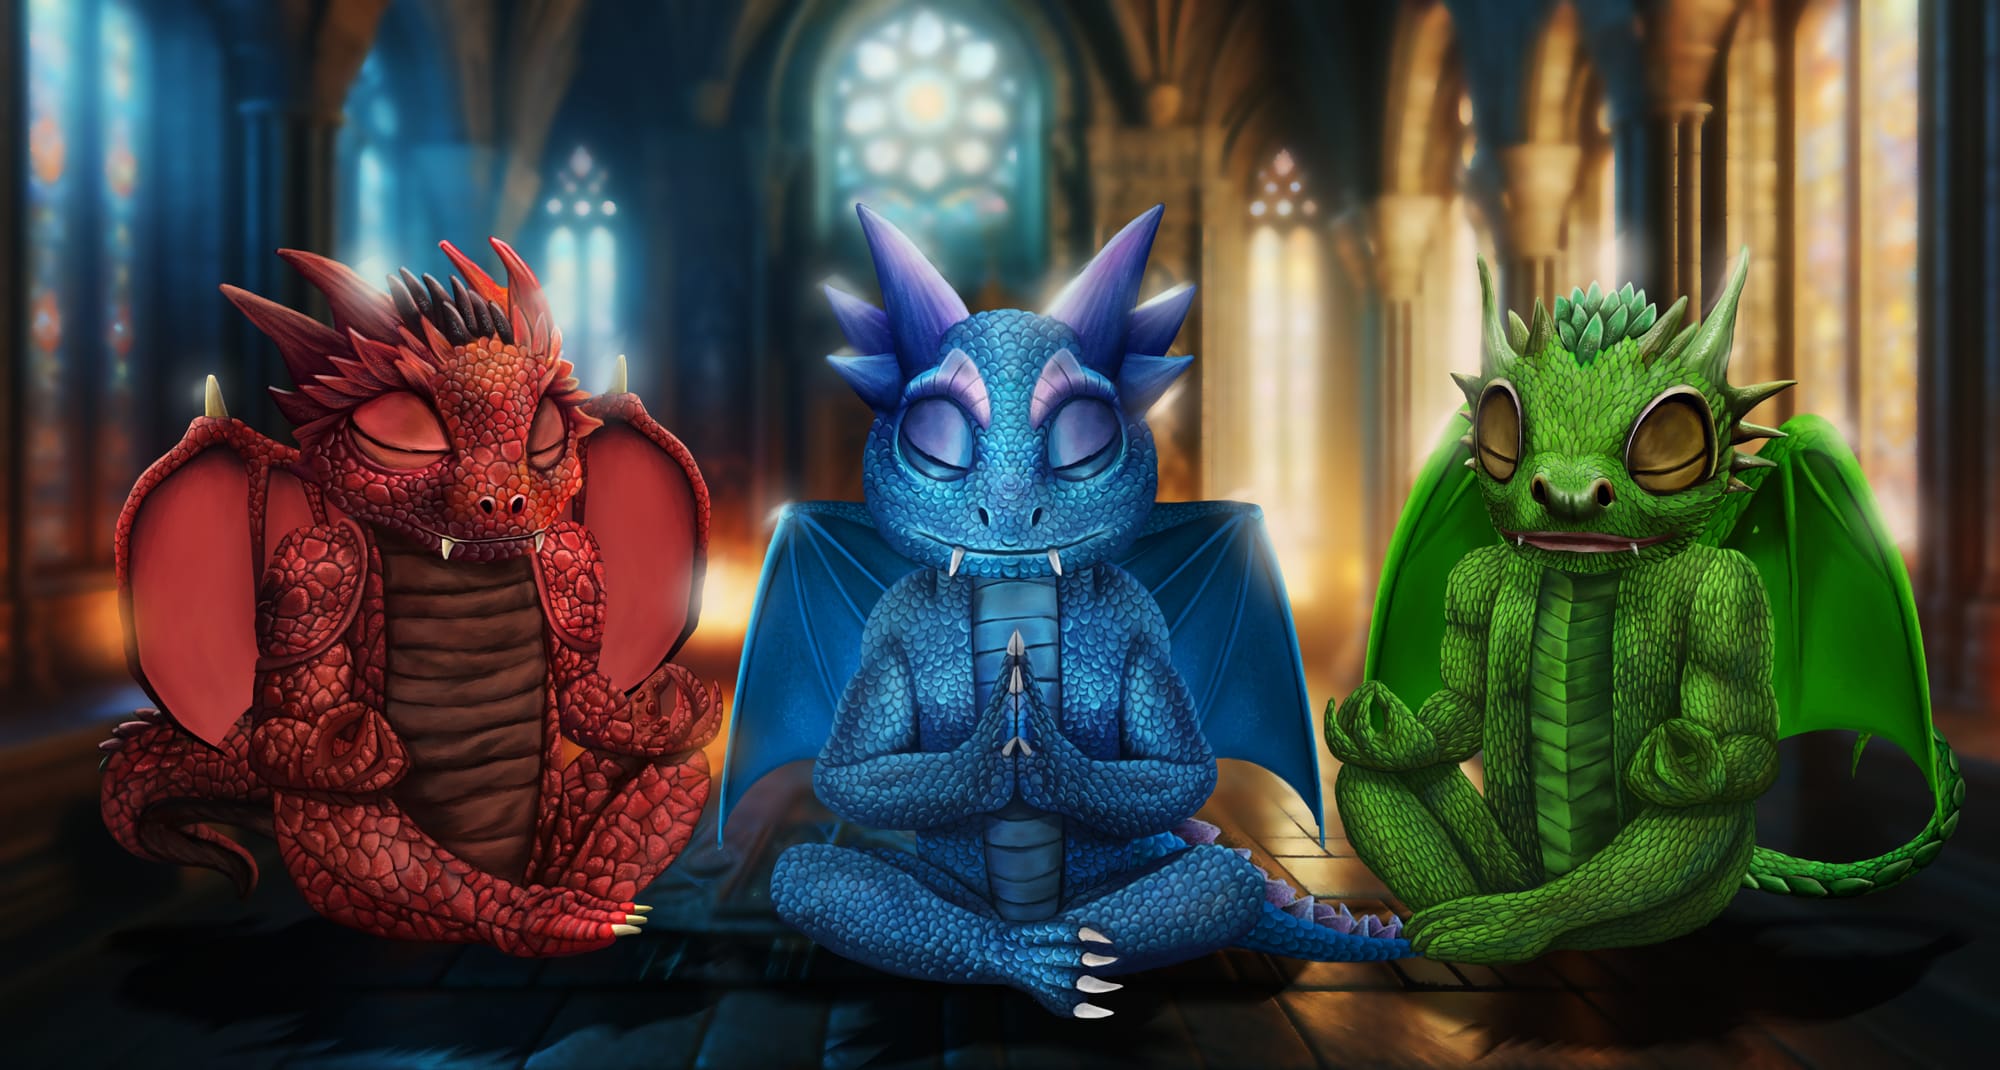 The Dragons Are Meditating